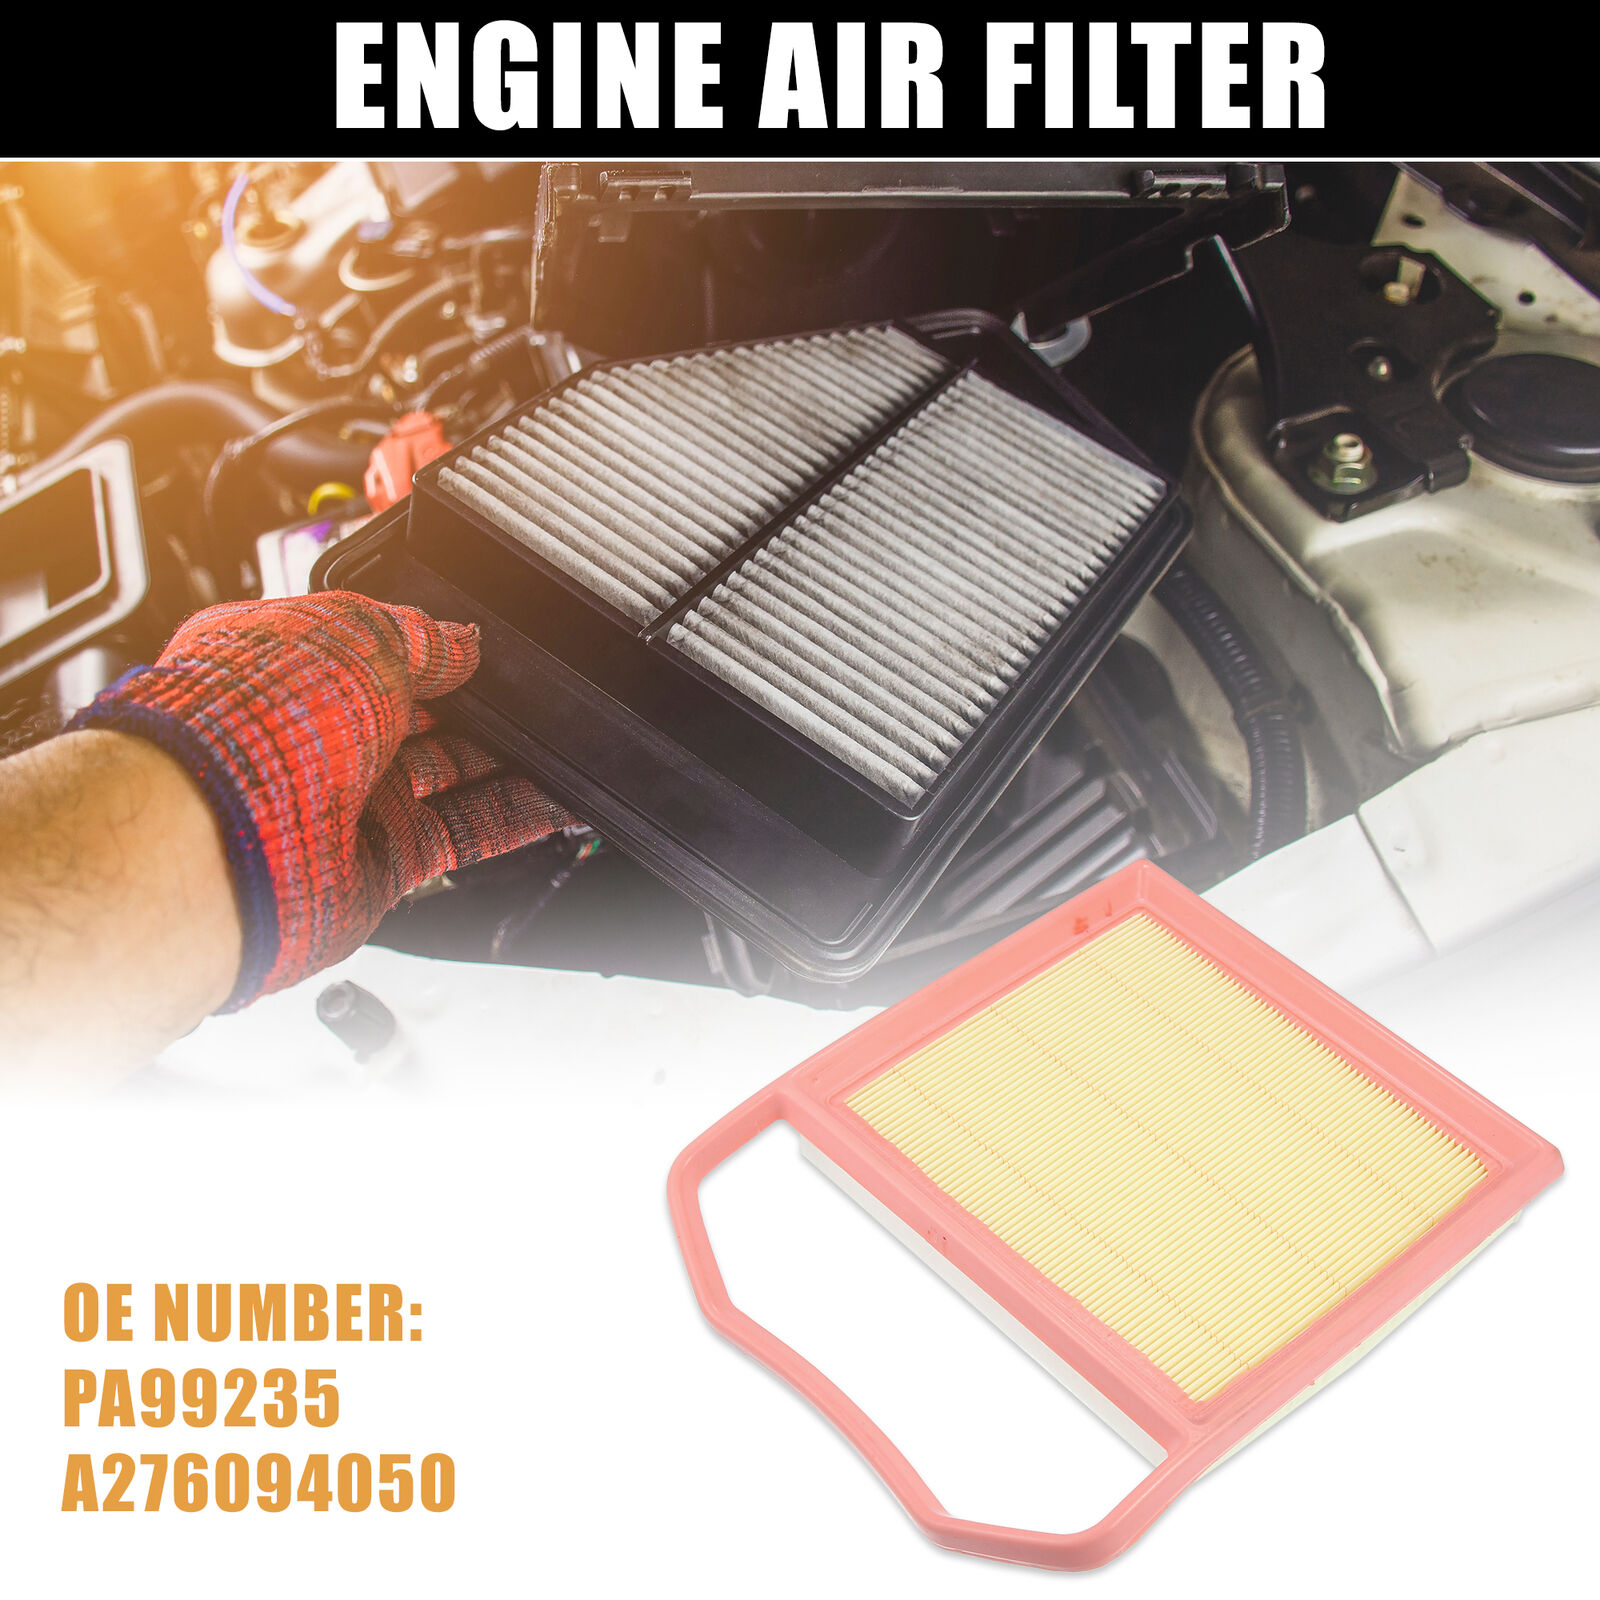 Car Engine Air Filter PA99235 for Mercedes-Benz C43 AMG GLE43 AMG 3.0L 2017-2019